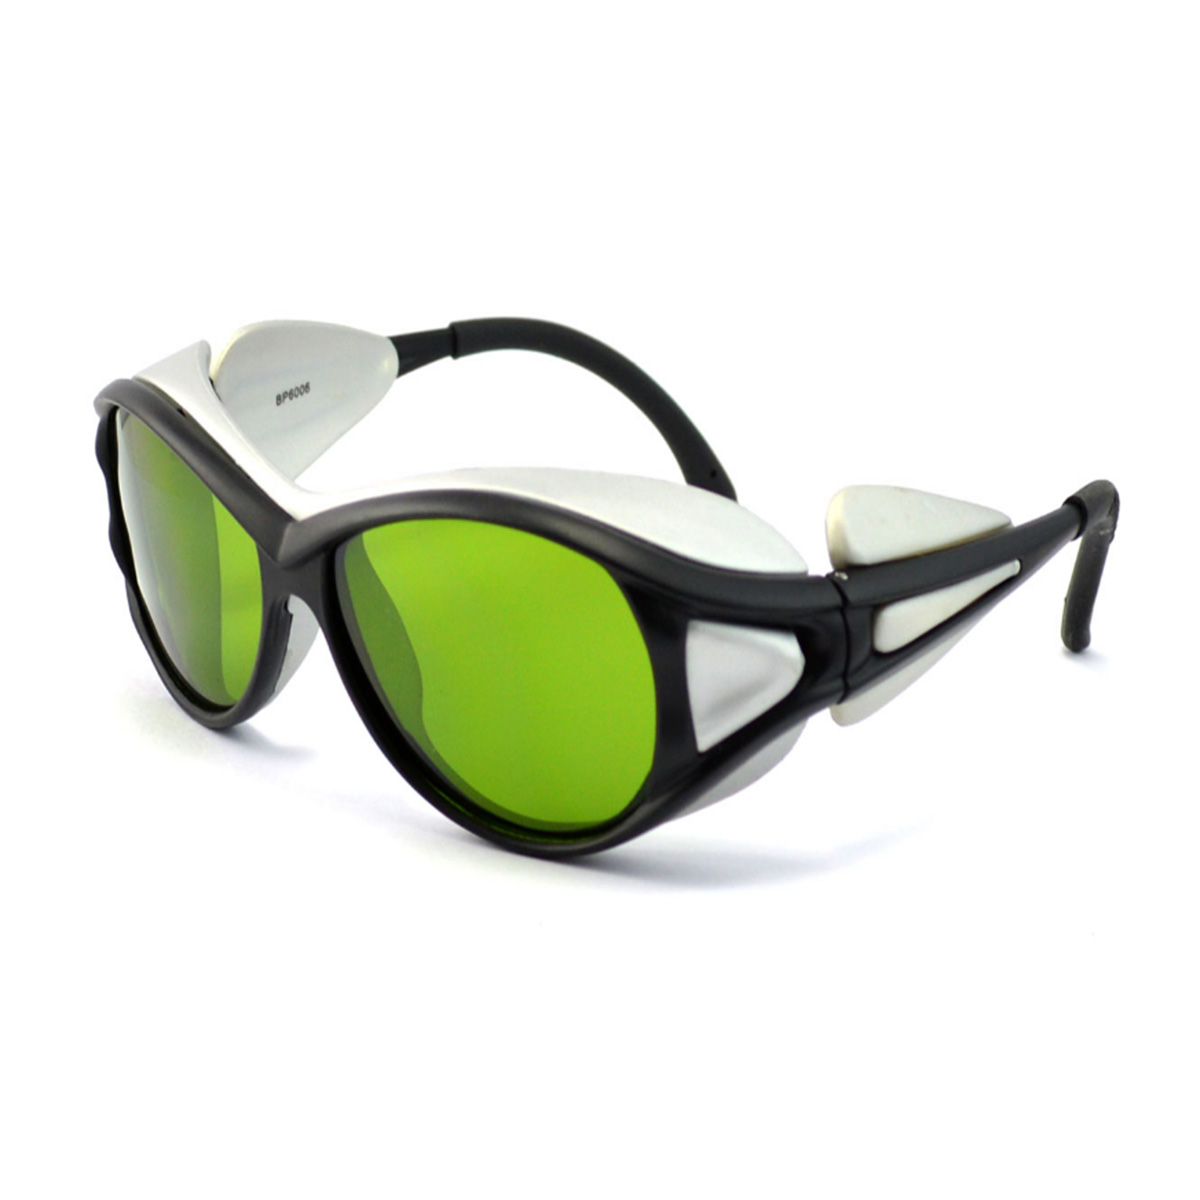 1064nm-OD5-PC-Laser-Safety-Glasses-Eyewear-Laser-Protective-Goggles-w-Case-Eye-Protection-1064nm-Wav-1444977